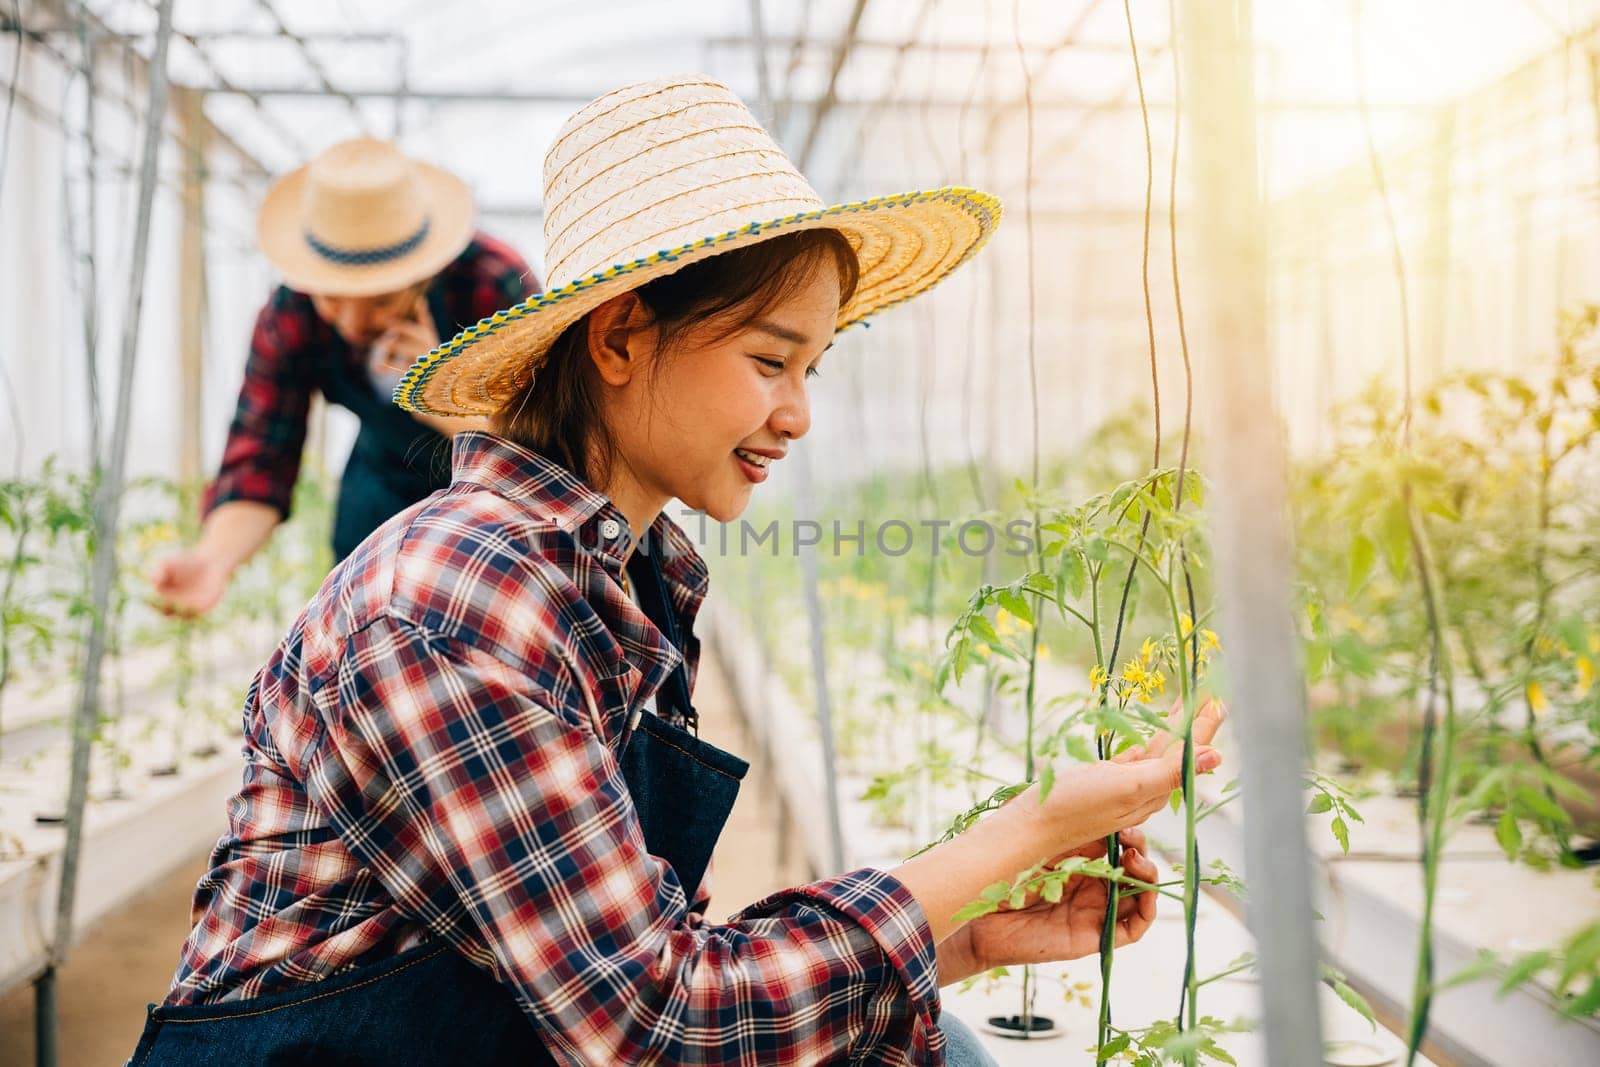 Woman in the greenhouse an entrepreneur and owner checks tomato plants for quality by Sorapop